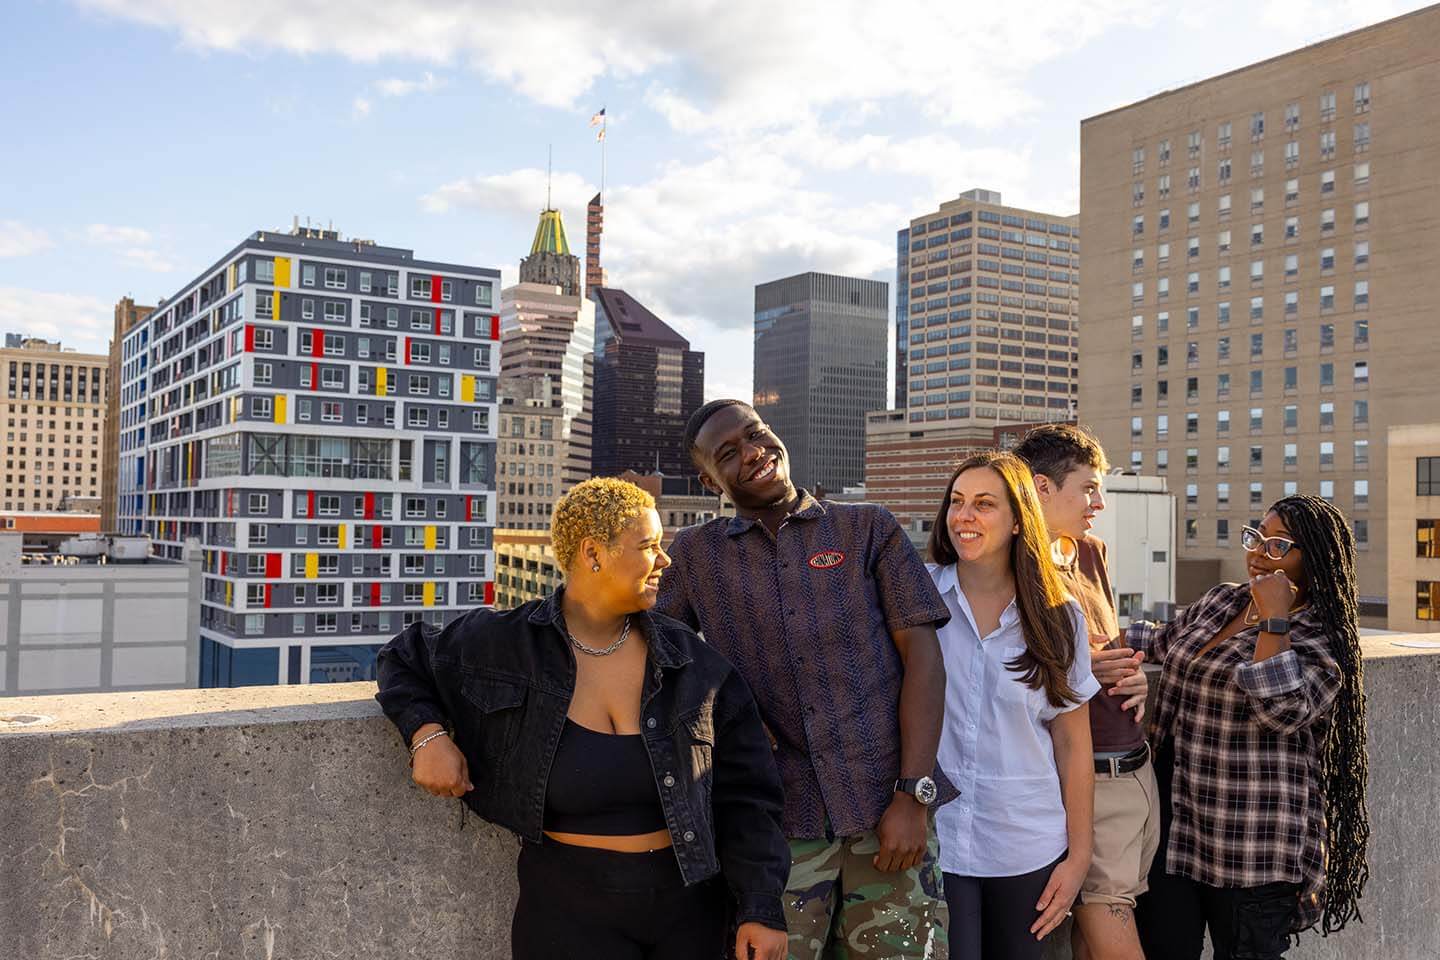 Group of young adults against the Baltimore City skyline.